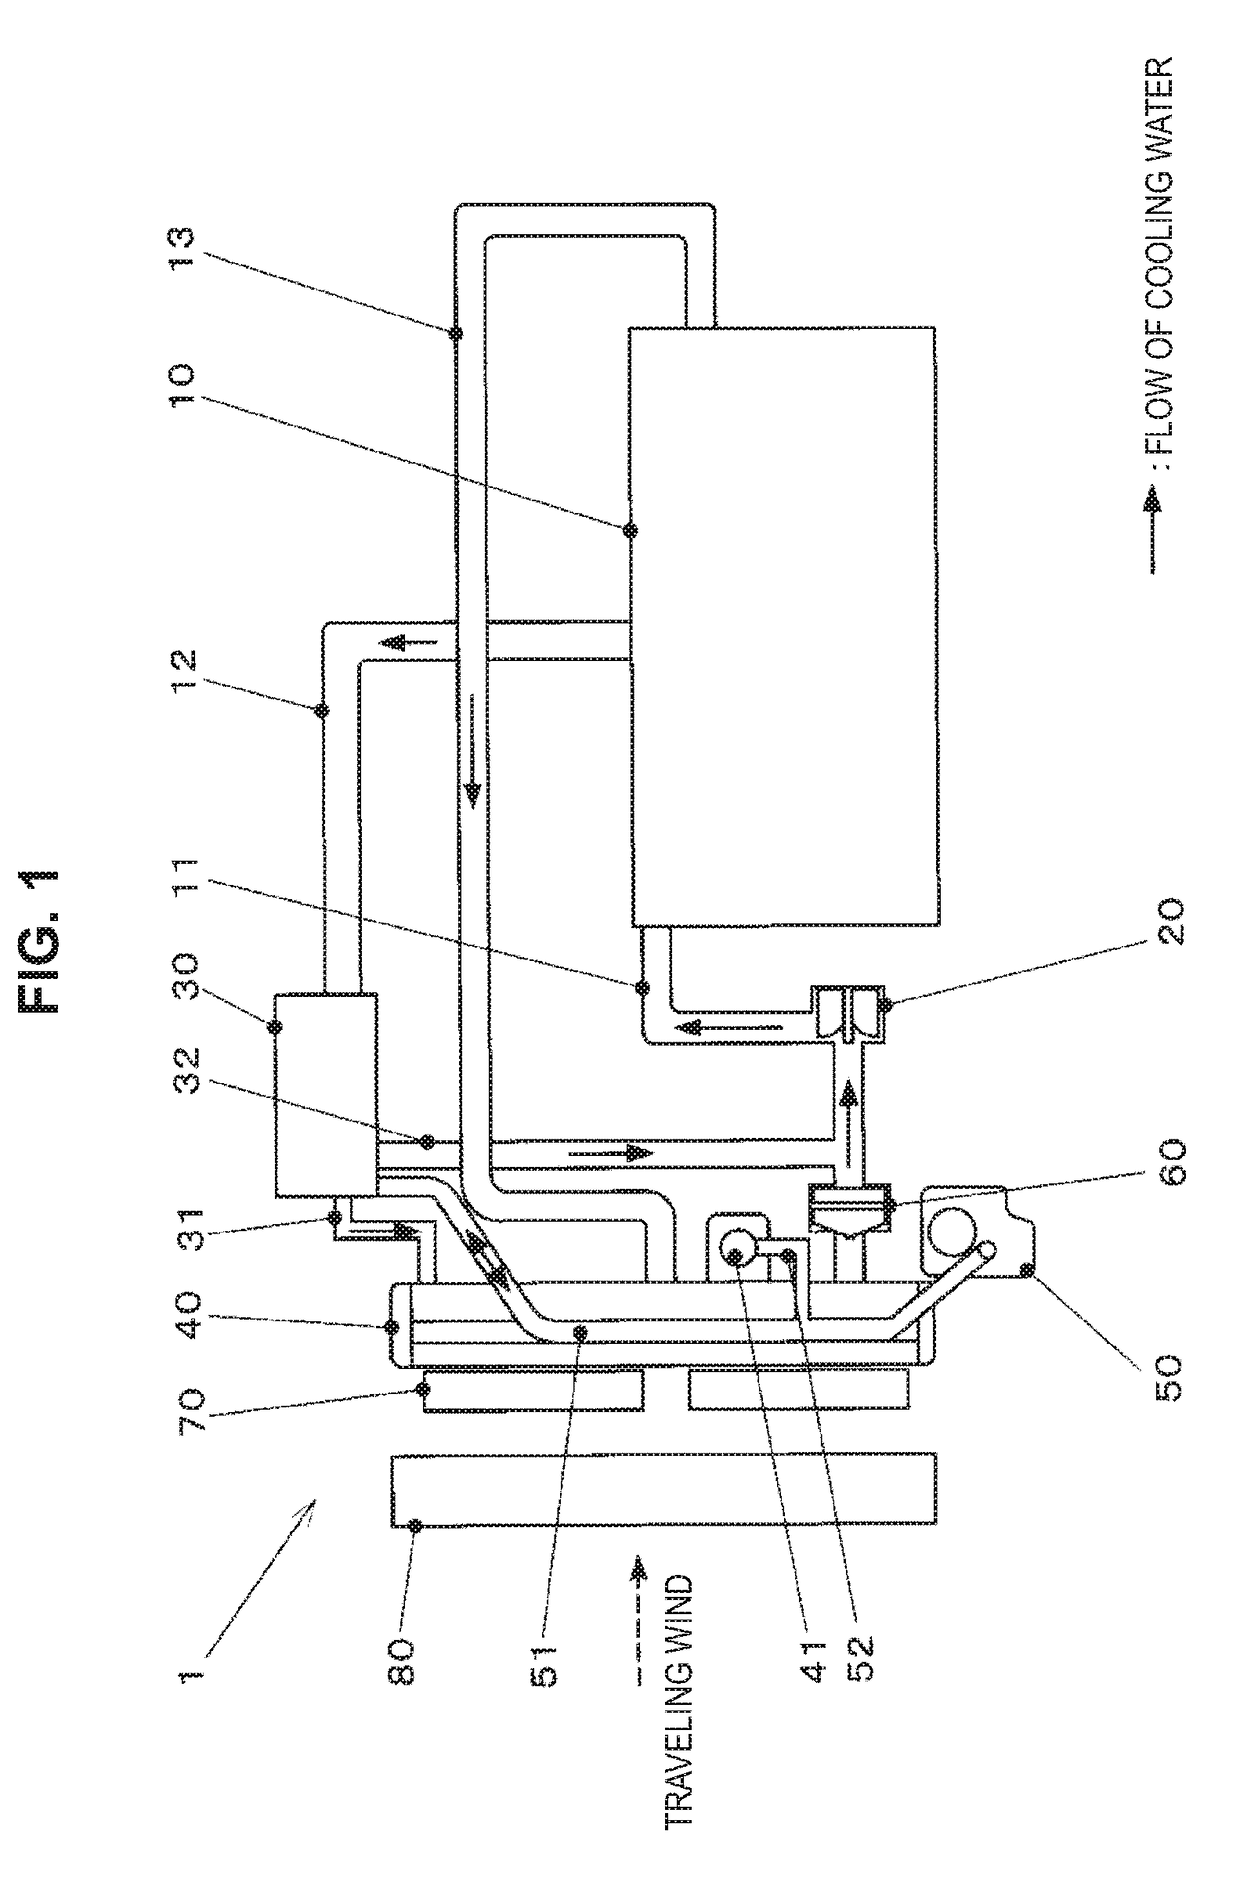 Thermostat malfunction detection device